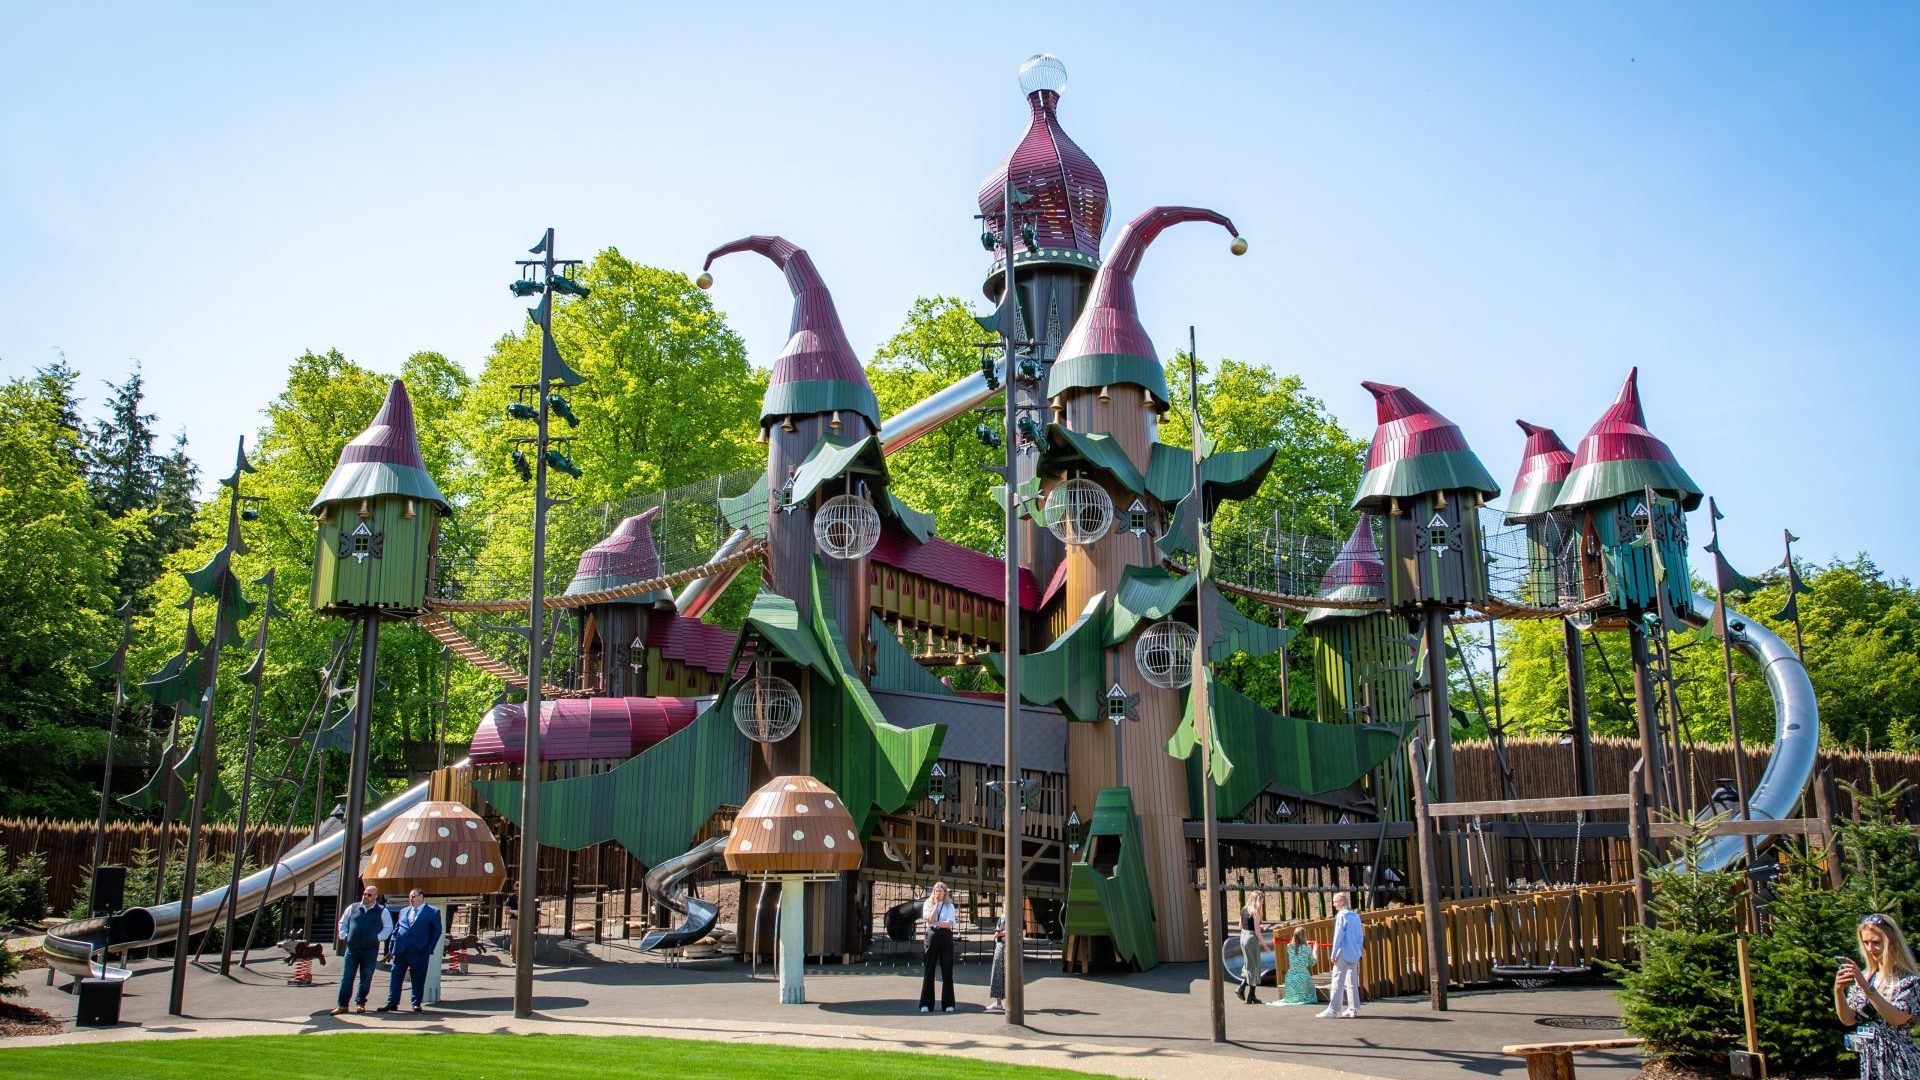 The Lilidorei play village at the Alnwick Garden in Northumberland, a £15.5m project developed by the Duchess of Northumberland

and the subject of Channel 4’s documentary series The Duchess and Her Magical Kingdom. Photo: Monstrum Playgrounds